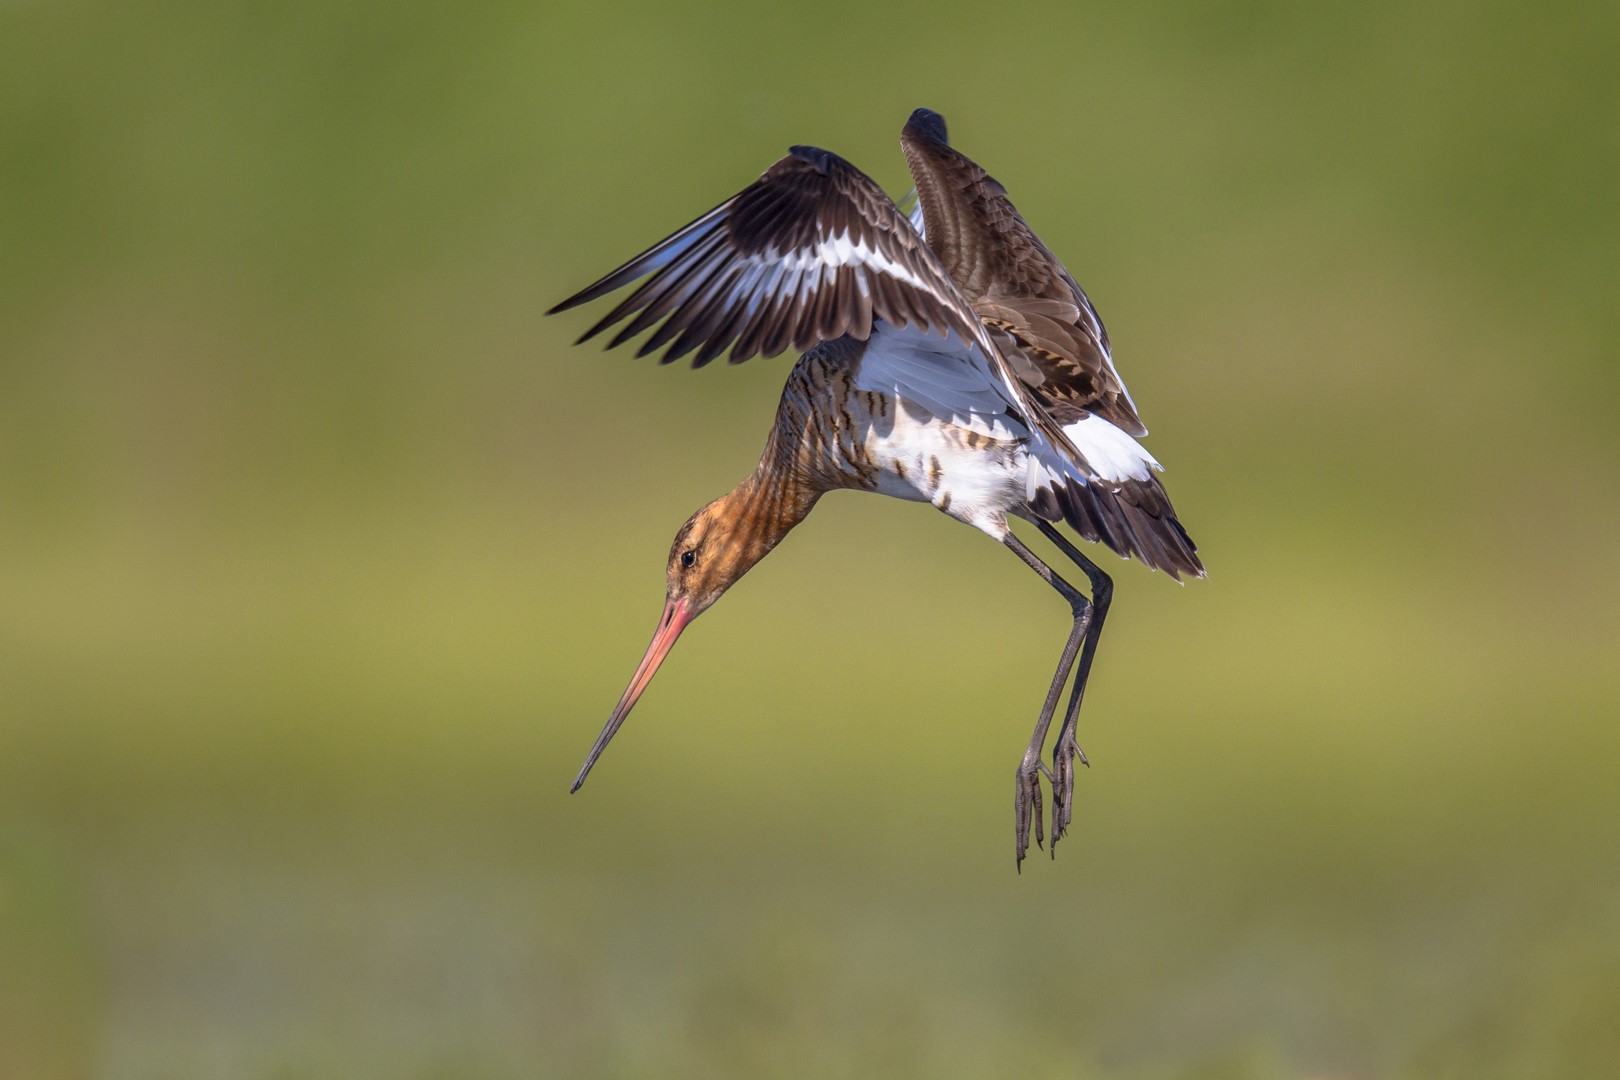 Black-tailed Godwit (Limosa limosa) wader bird in preparation for landing while flapping wings with feathers spread. Long legs are reaching for the ground